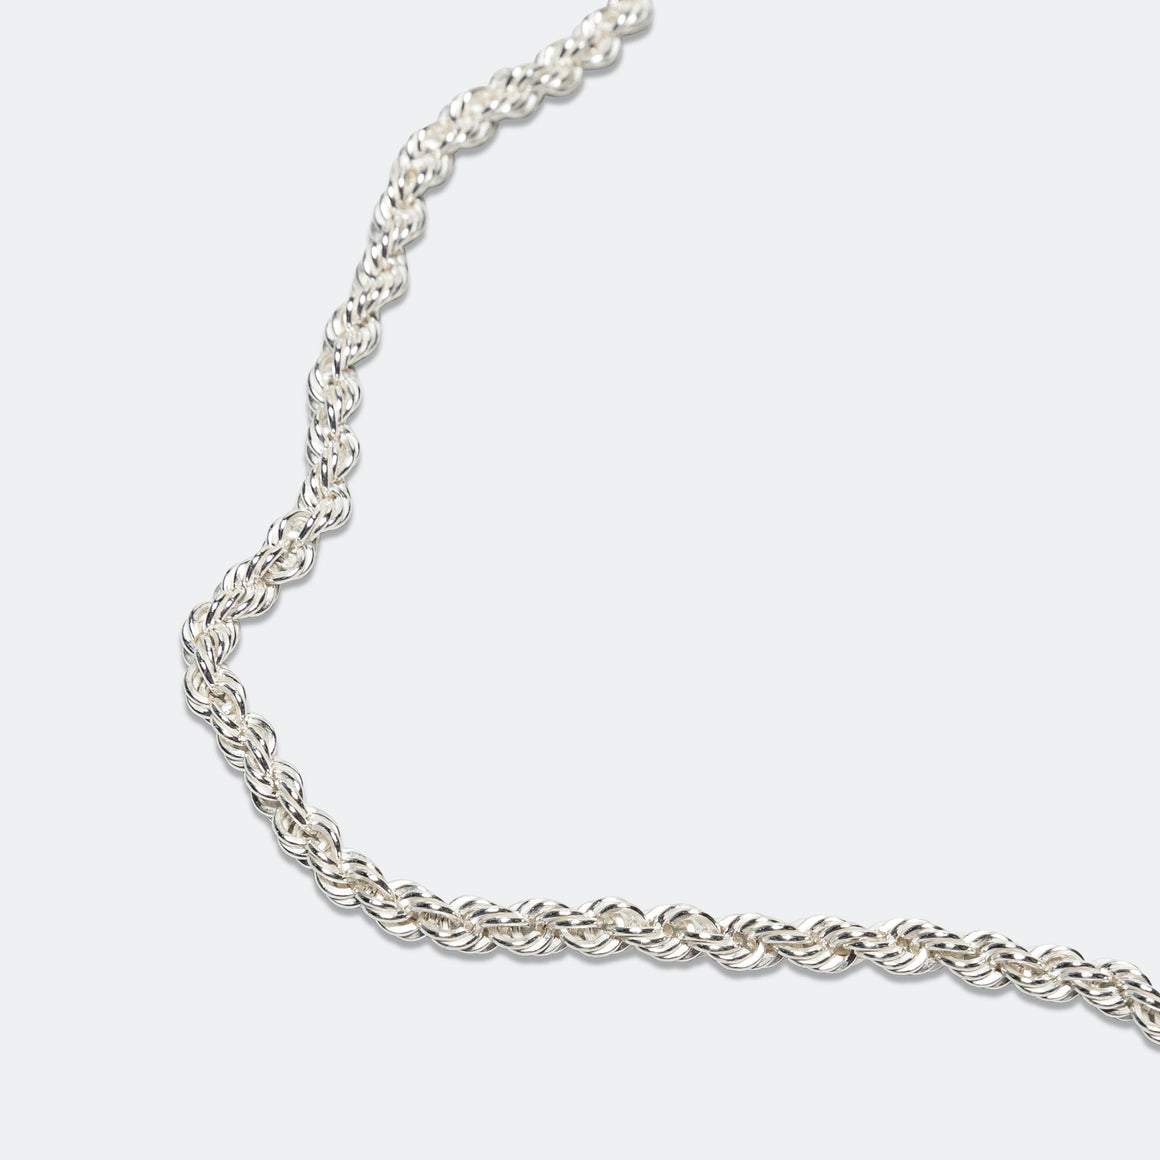 Rope Chain Necklace - 925 Silver